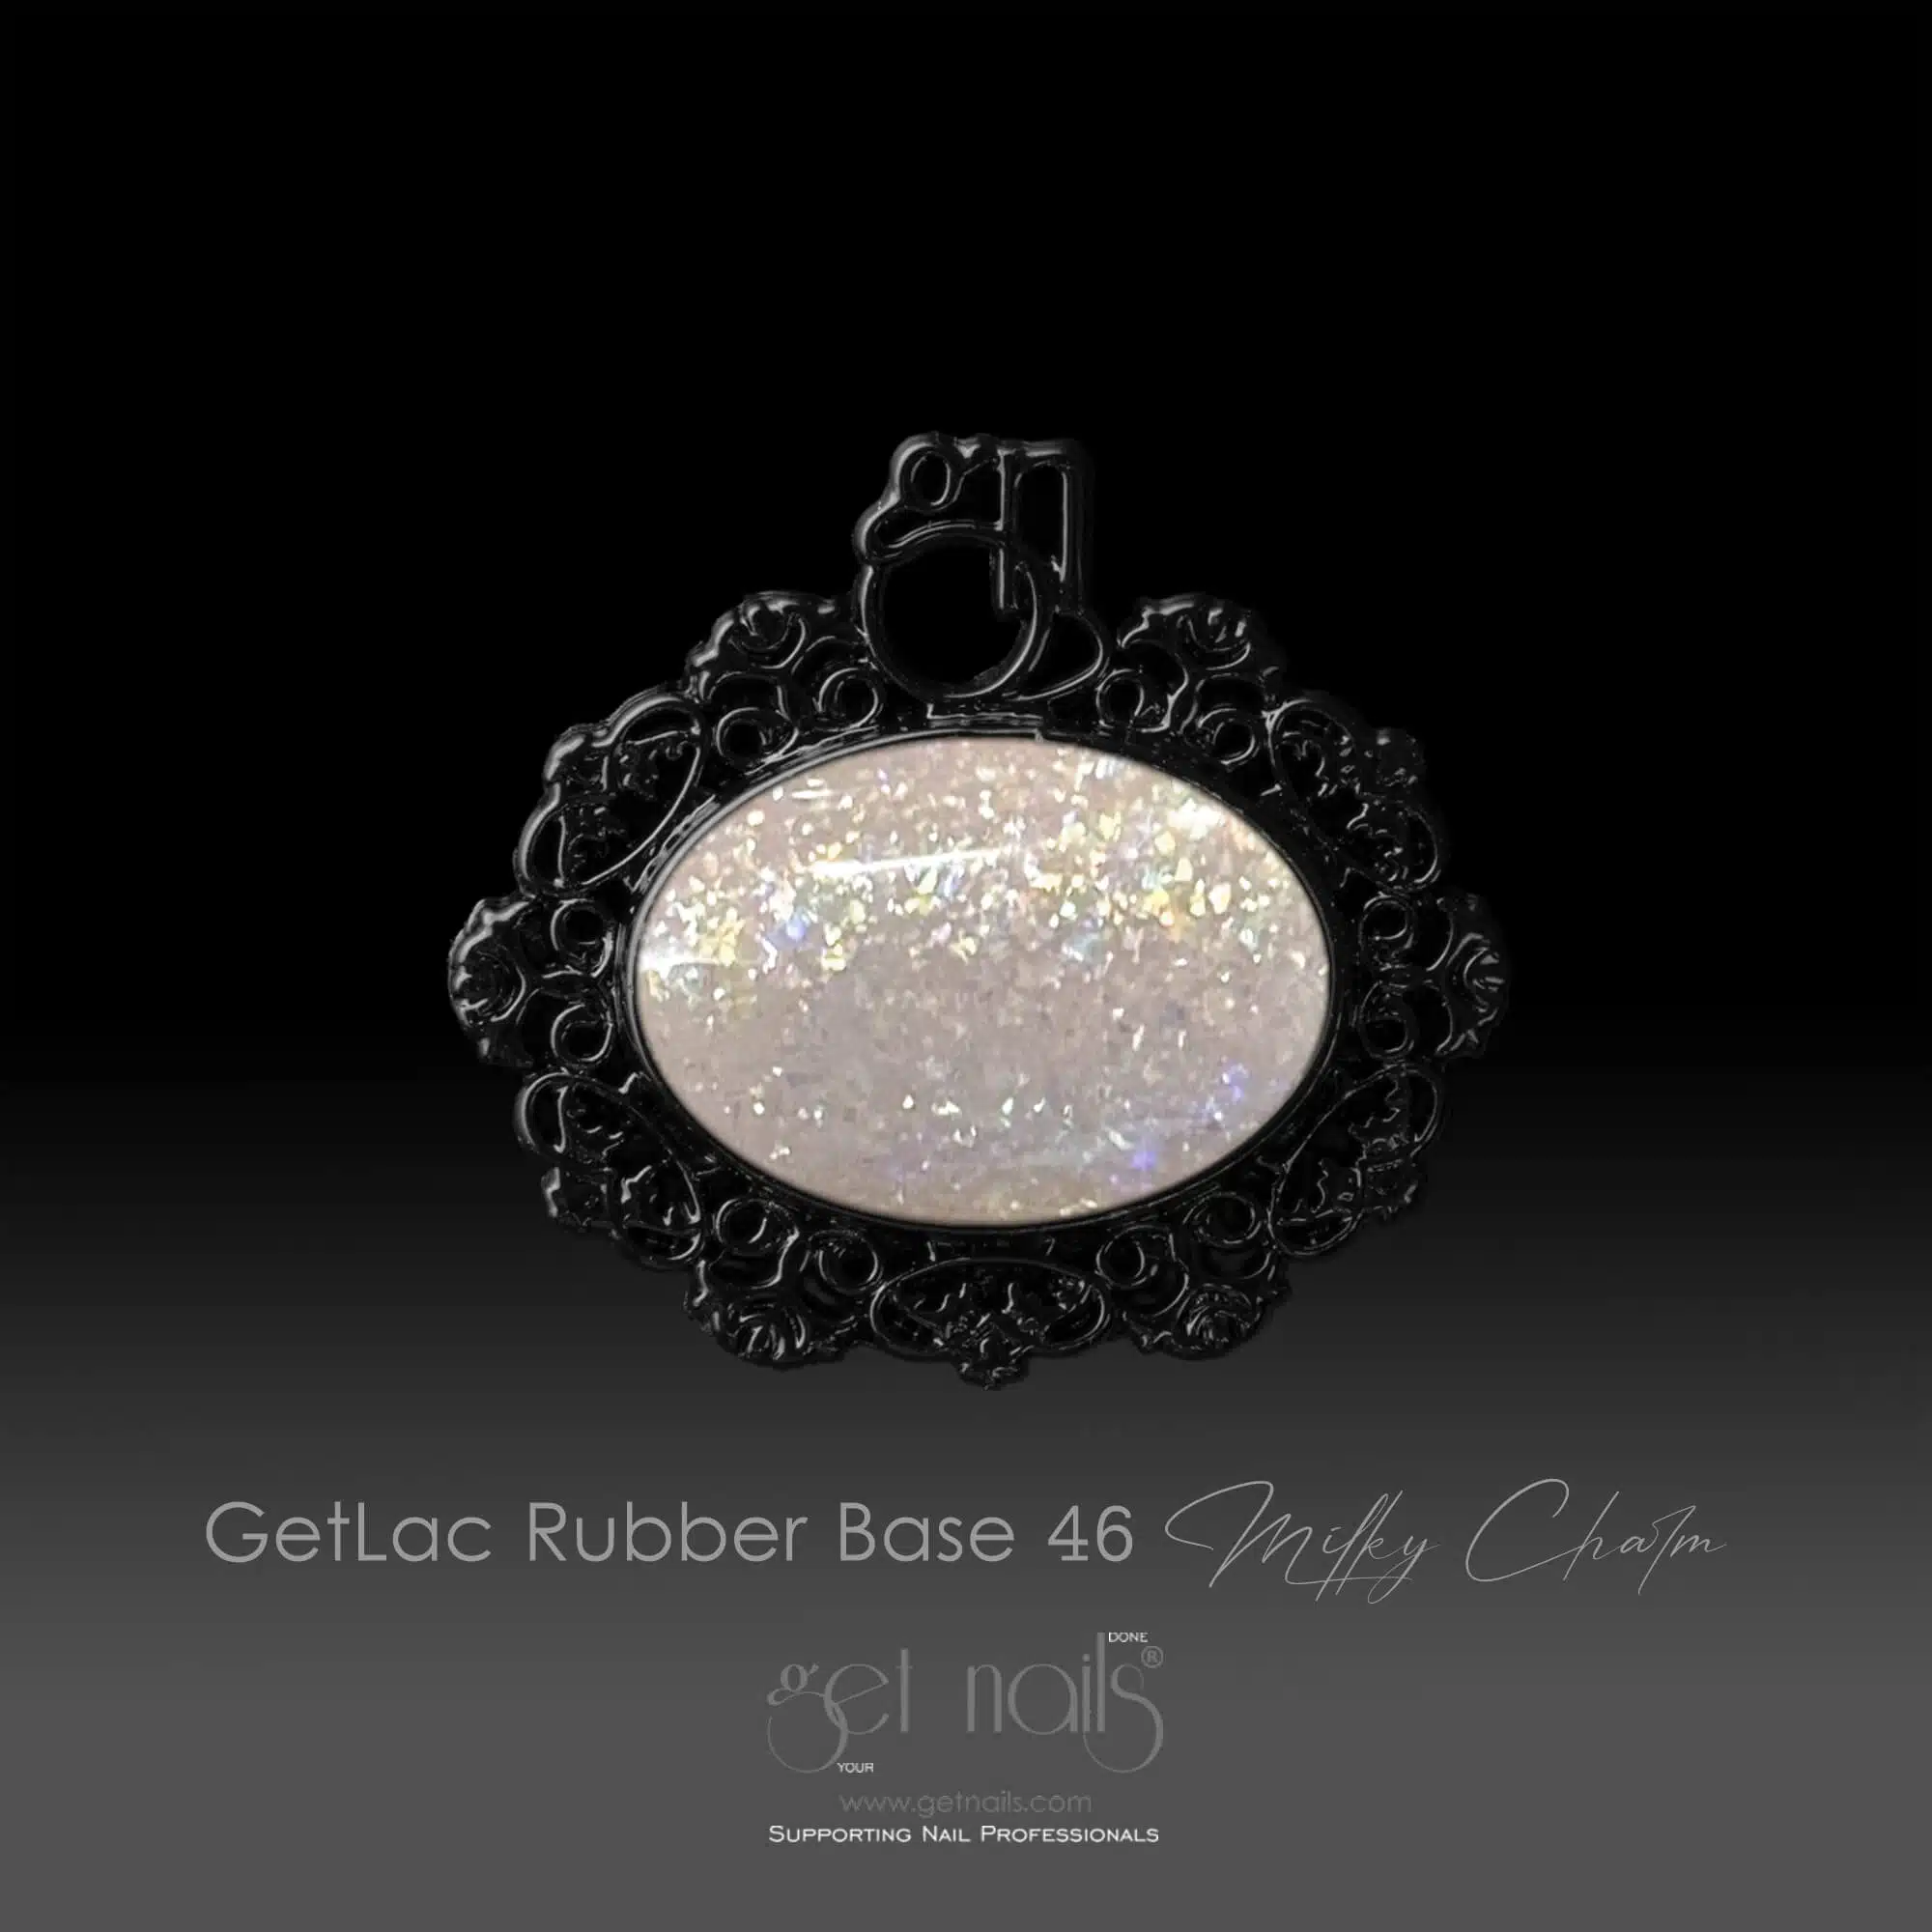 Get Nails Austria - GetLac Rubber Base 46 Milky Charm 15g